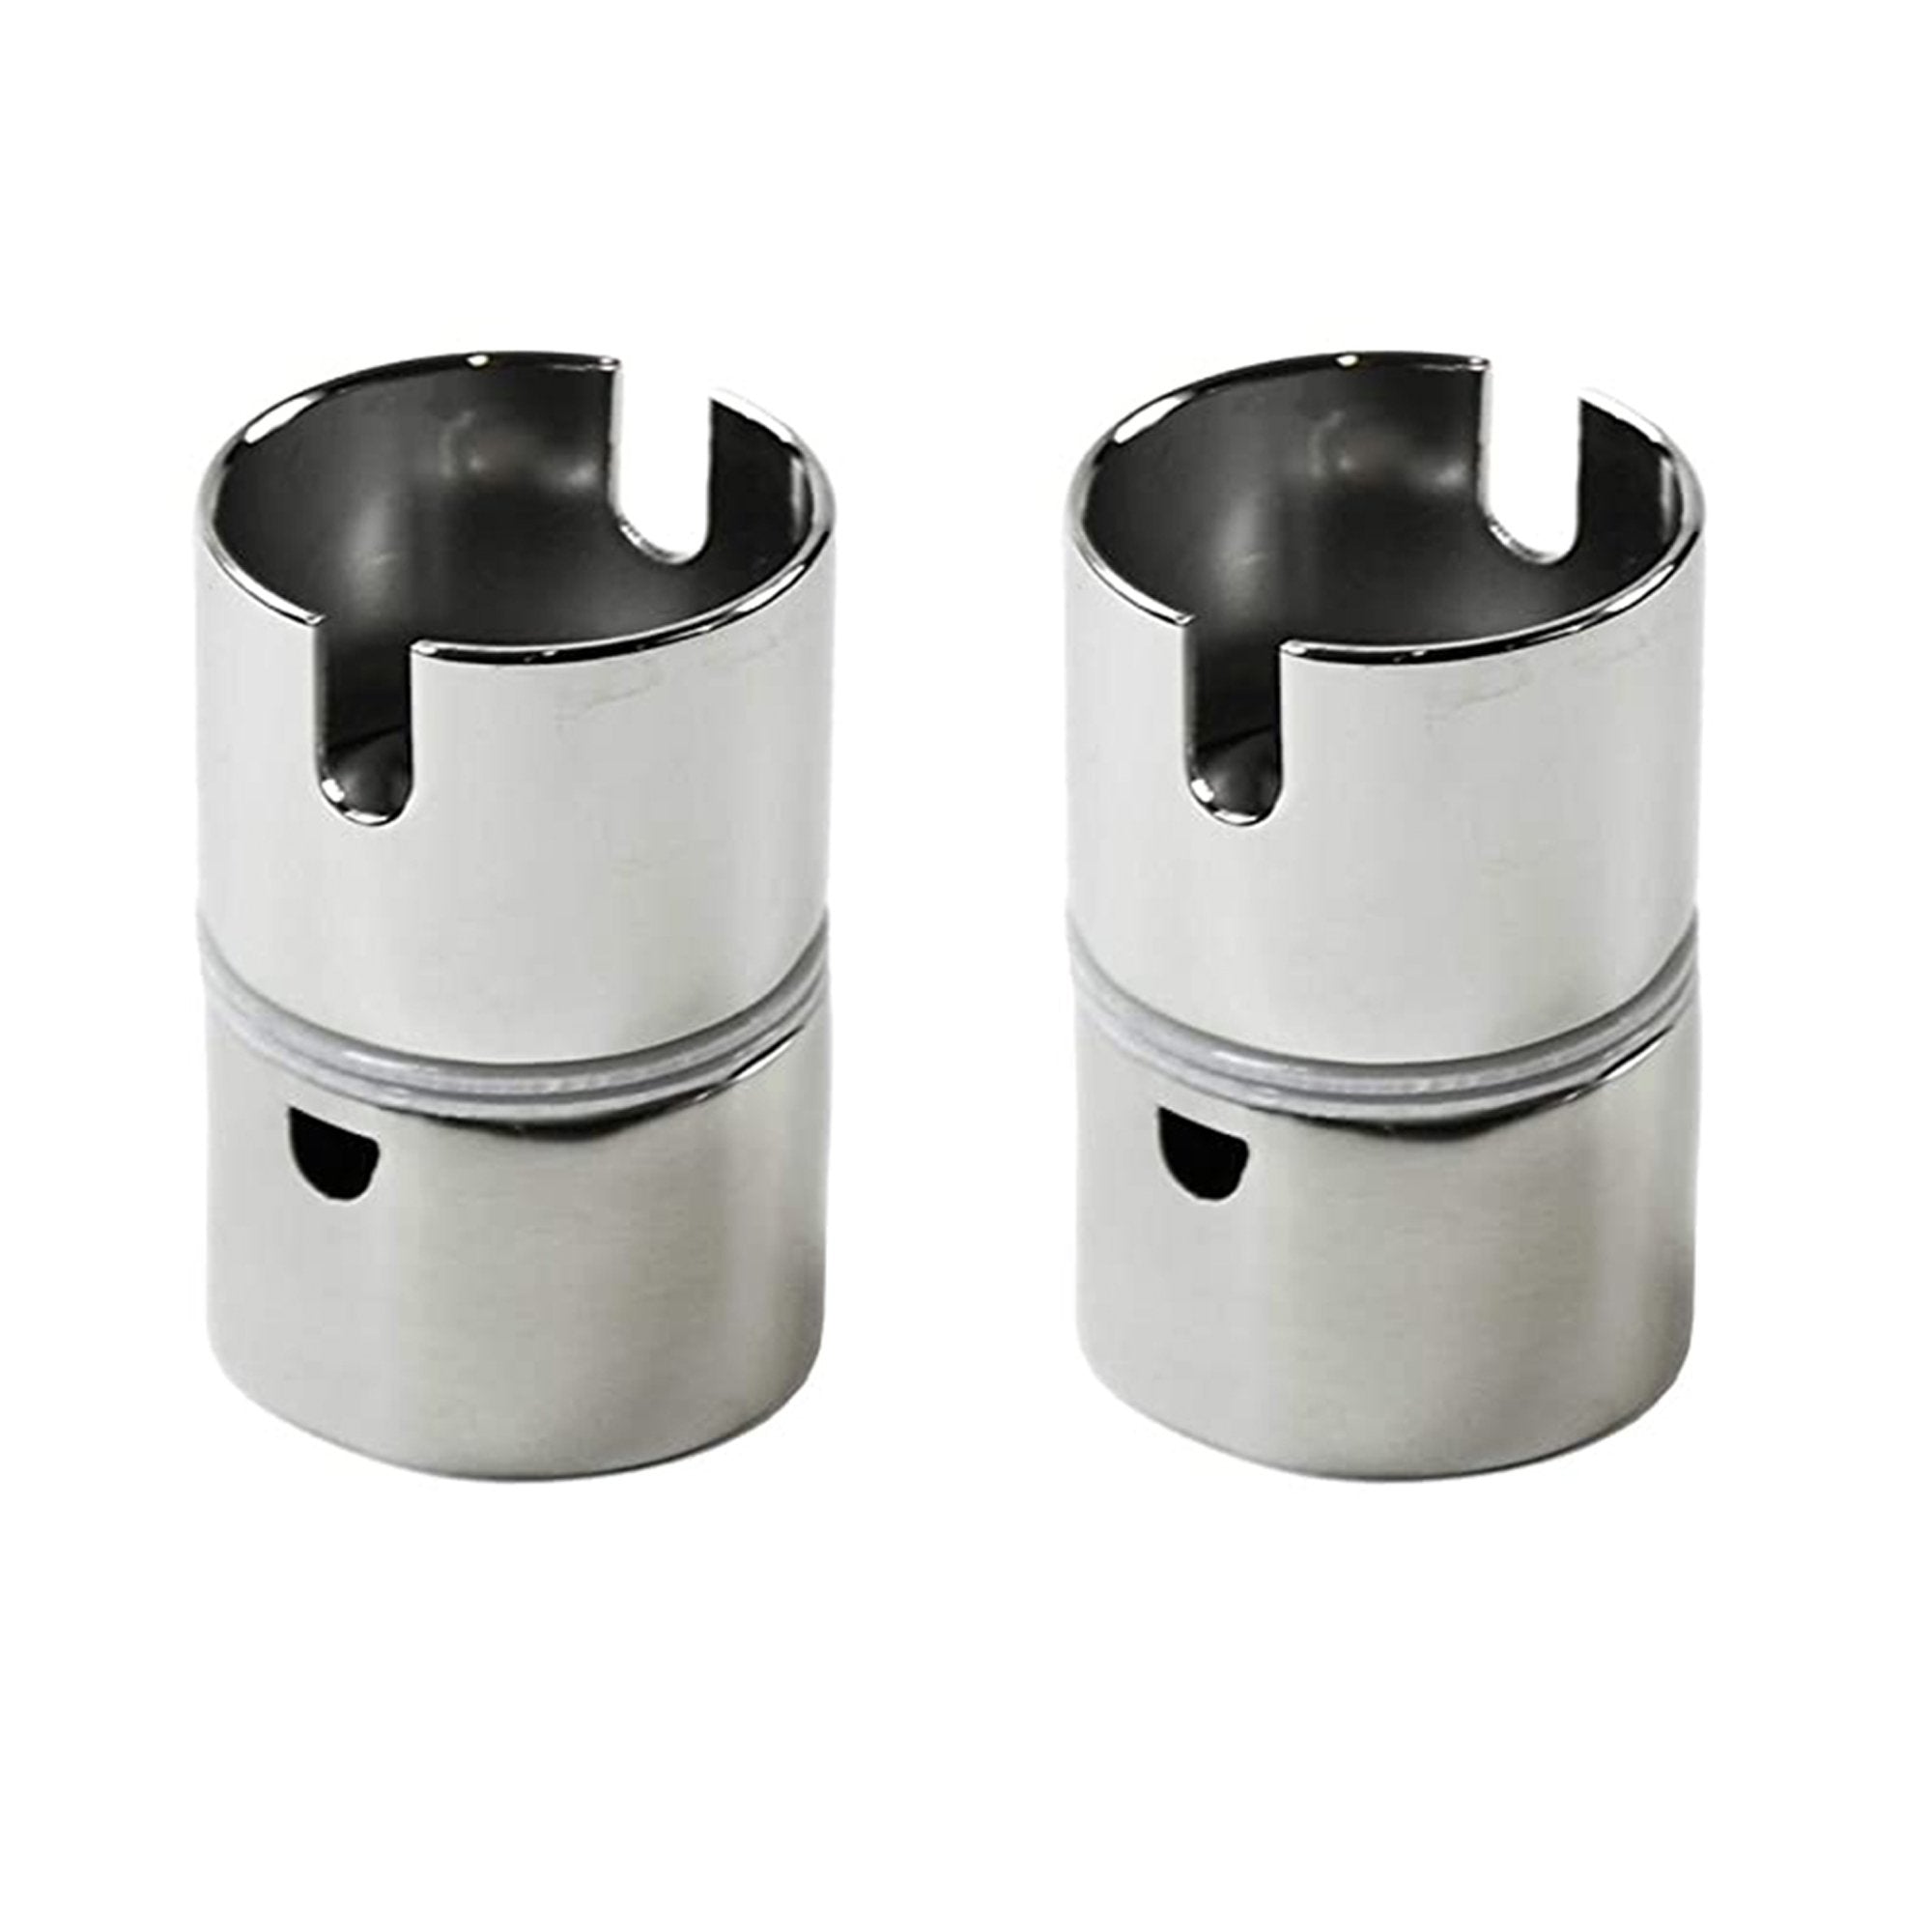 Marine City 316 Stainless Steel Drop-in Swivel for Rod Holder for Marine Boat Yacht Fishing (2 Pcs)